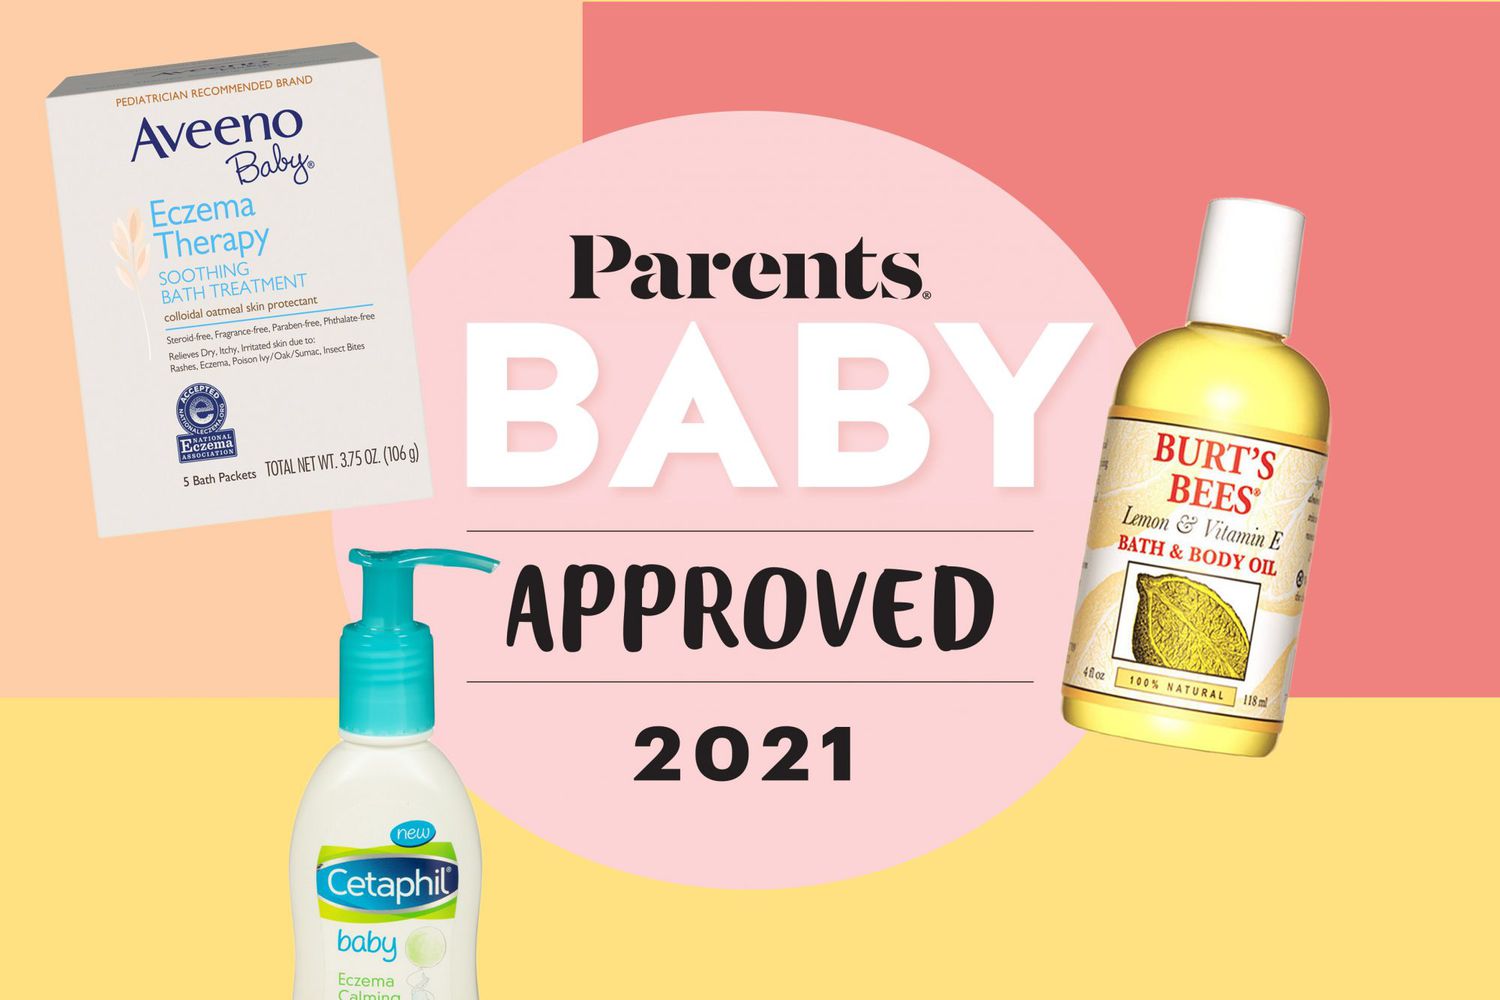 12 Best Eczema Creams, Lotions, and Products for Babies | Parents